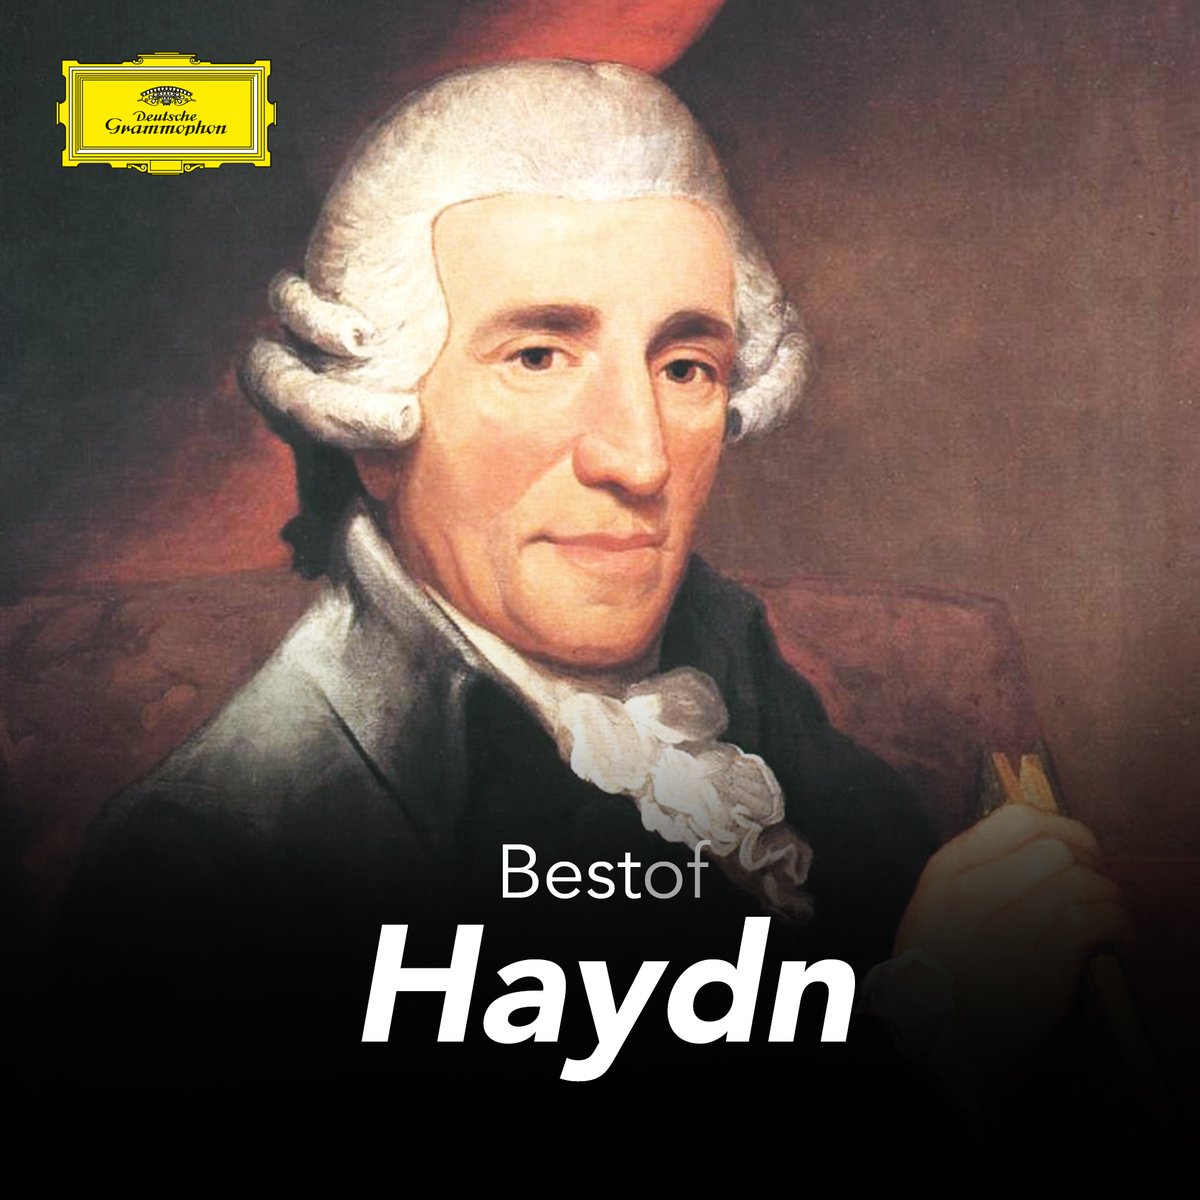 From Sokolov's take on his Keyboard Sonata No. 47 to the Emerson String Quartet's interpretation of The Seven Last Words, discover Haydn's best works with this playlist. 🎧 → DG.lnk.to/haydn